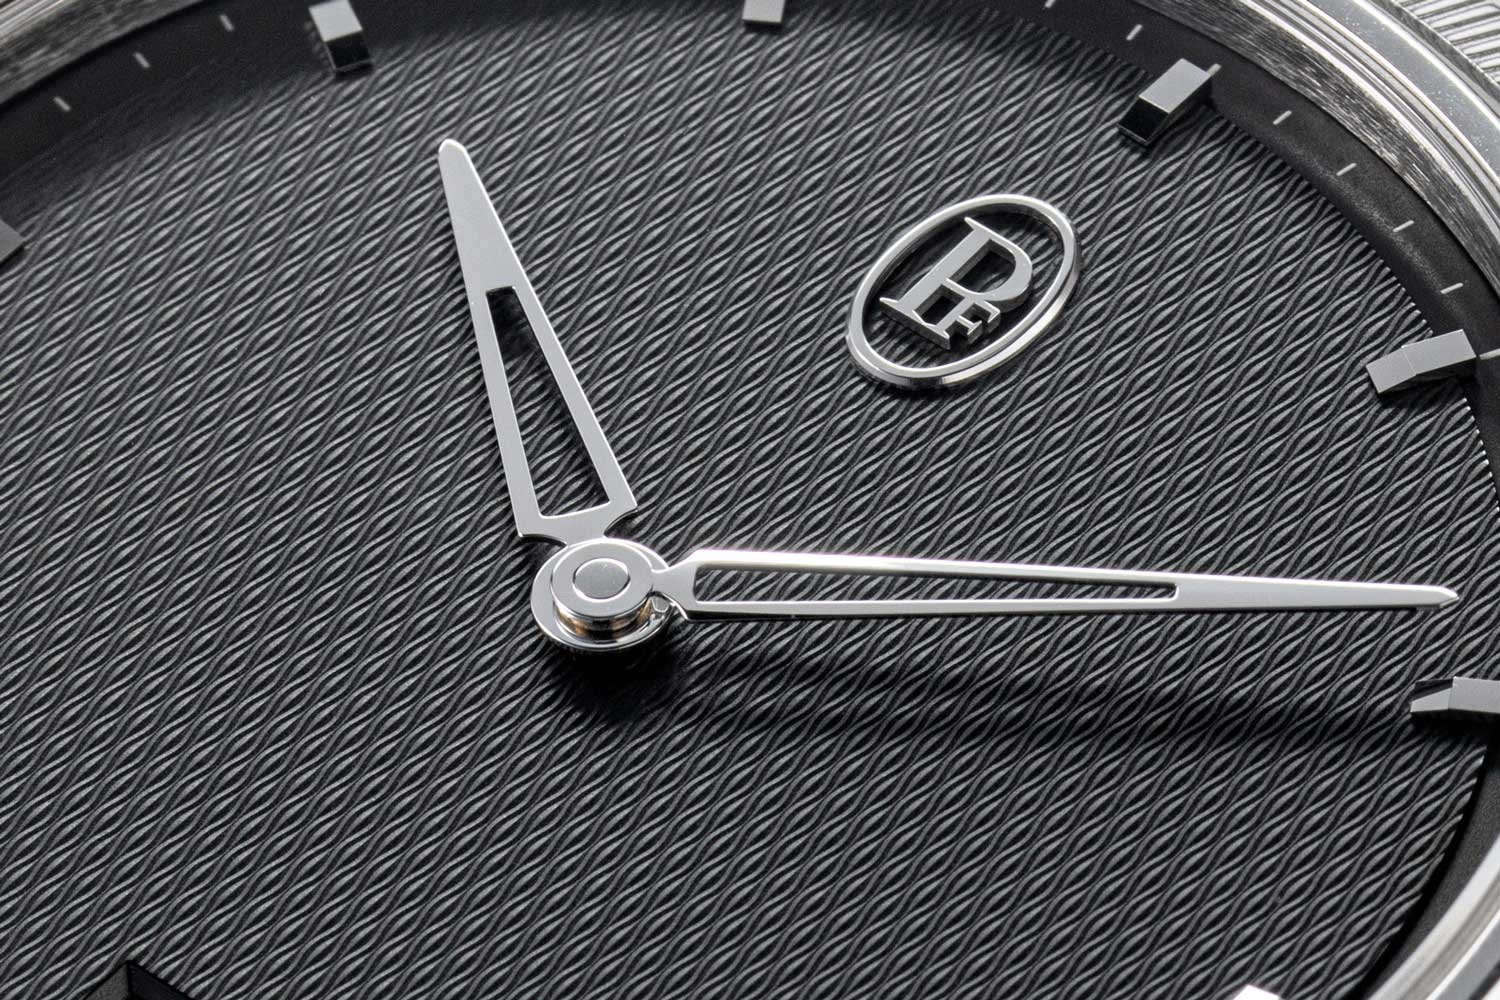 The grey "guilloché grain d'orge" dial, the high polished applied markers and minimalistic PF logo on the Parmigiani Fleurier Tonda PF Micro-Rotor (©Revolution)